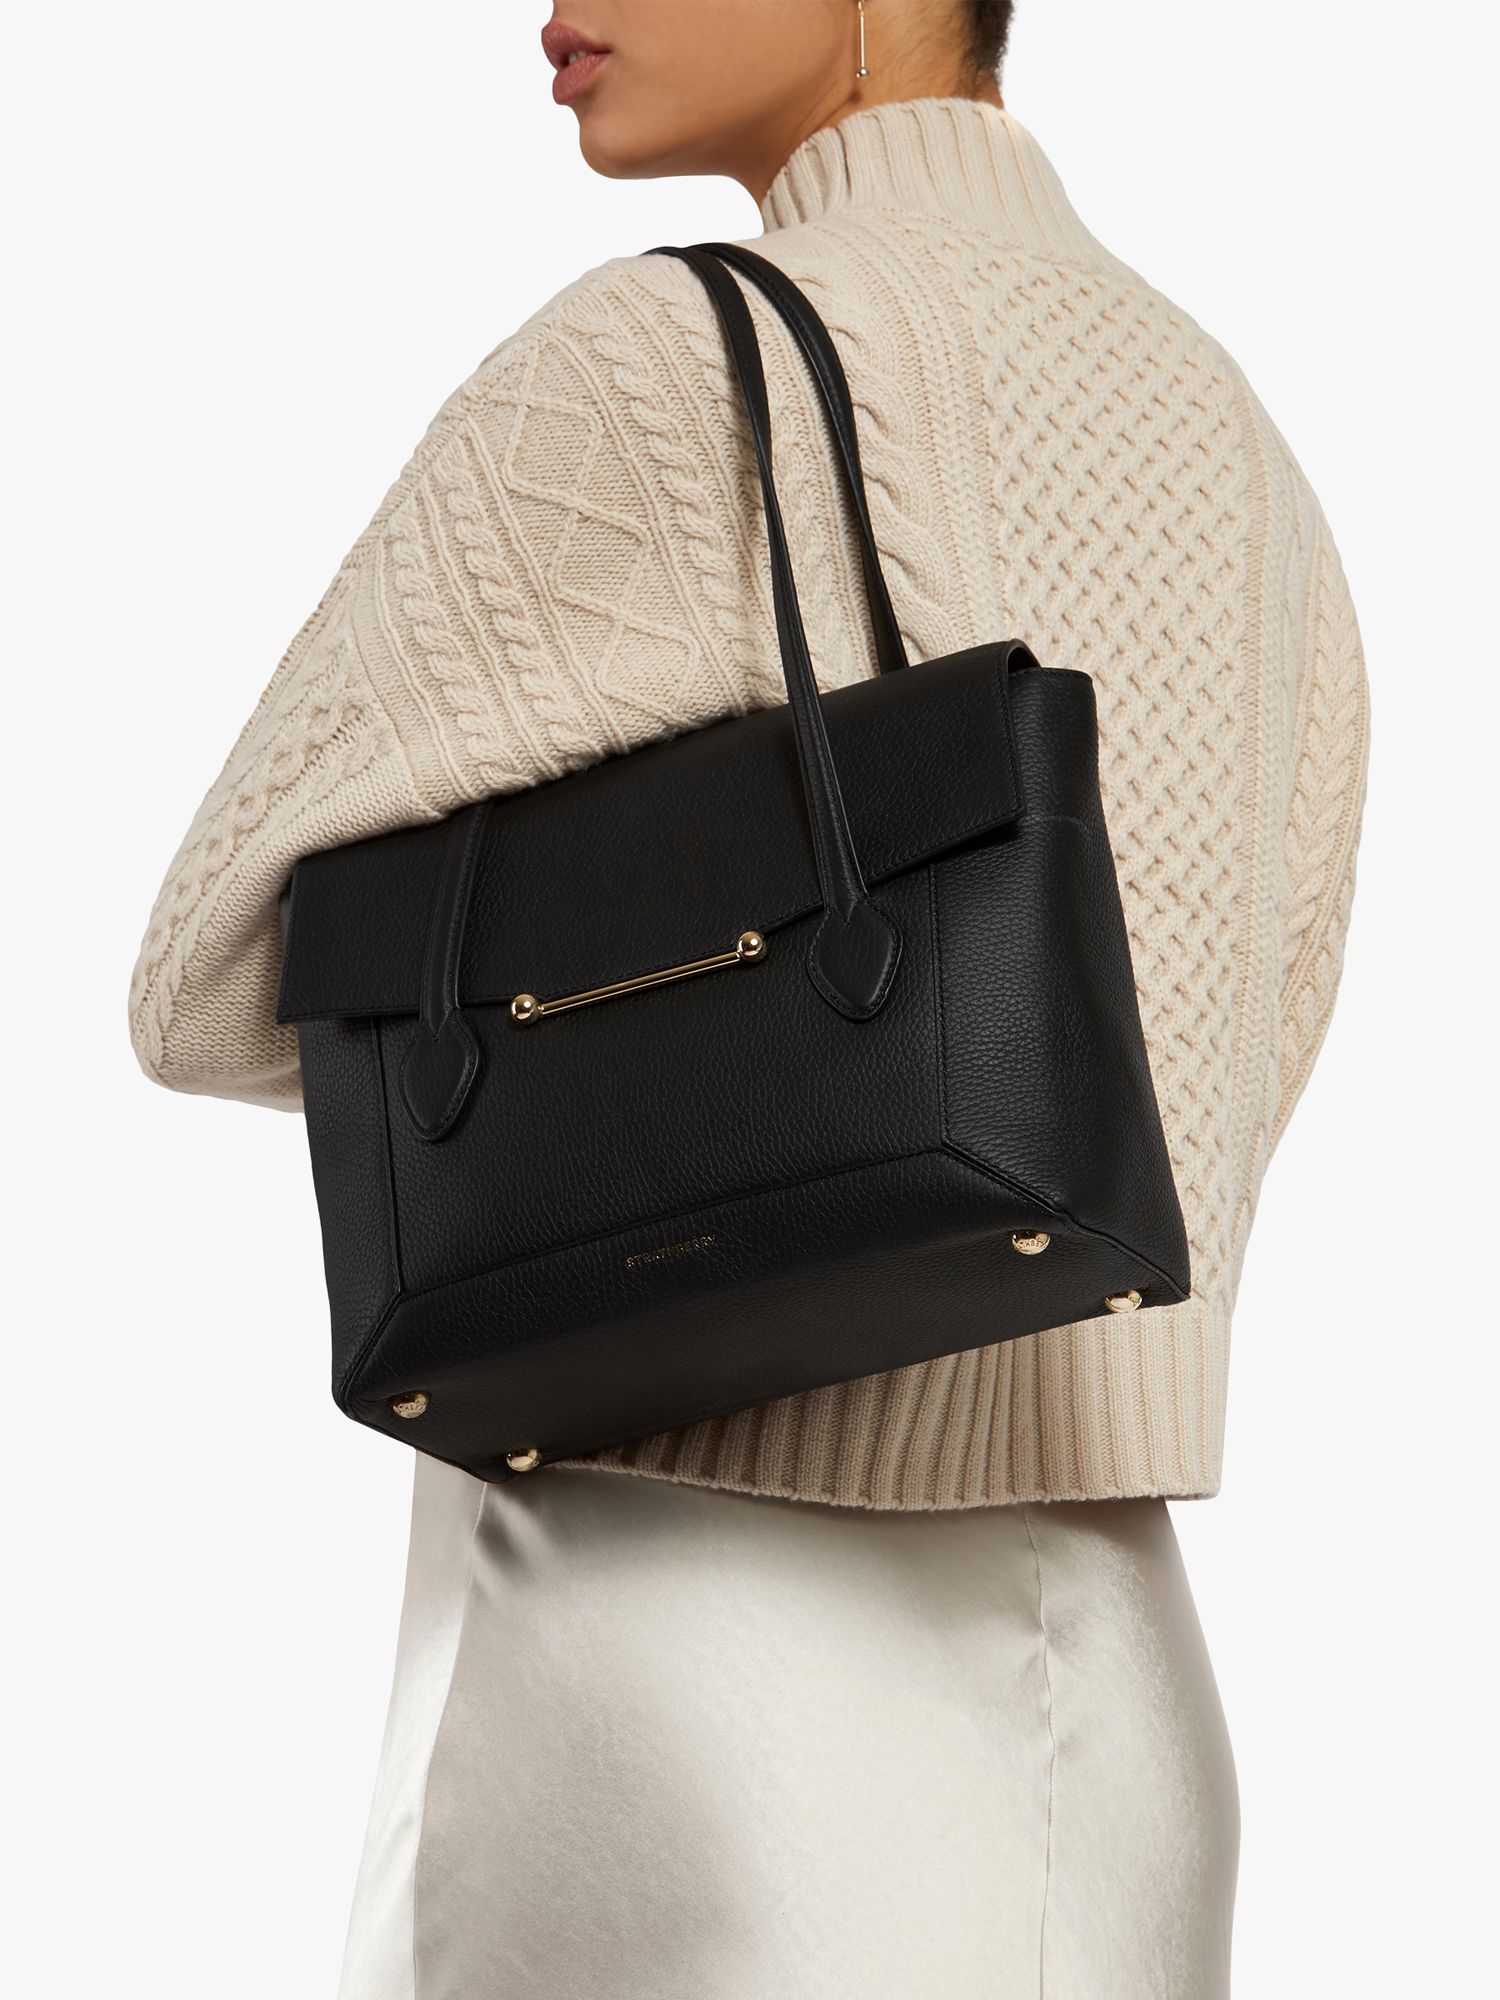 Strathberry Nano Leather Tote Bag, Black at John Lewis & Partners